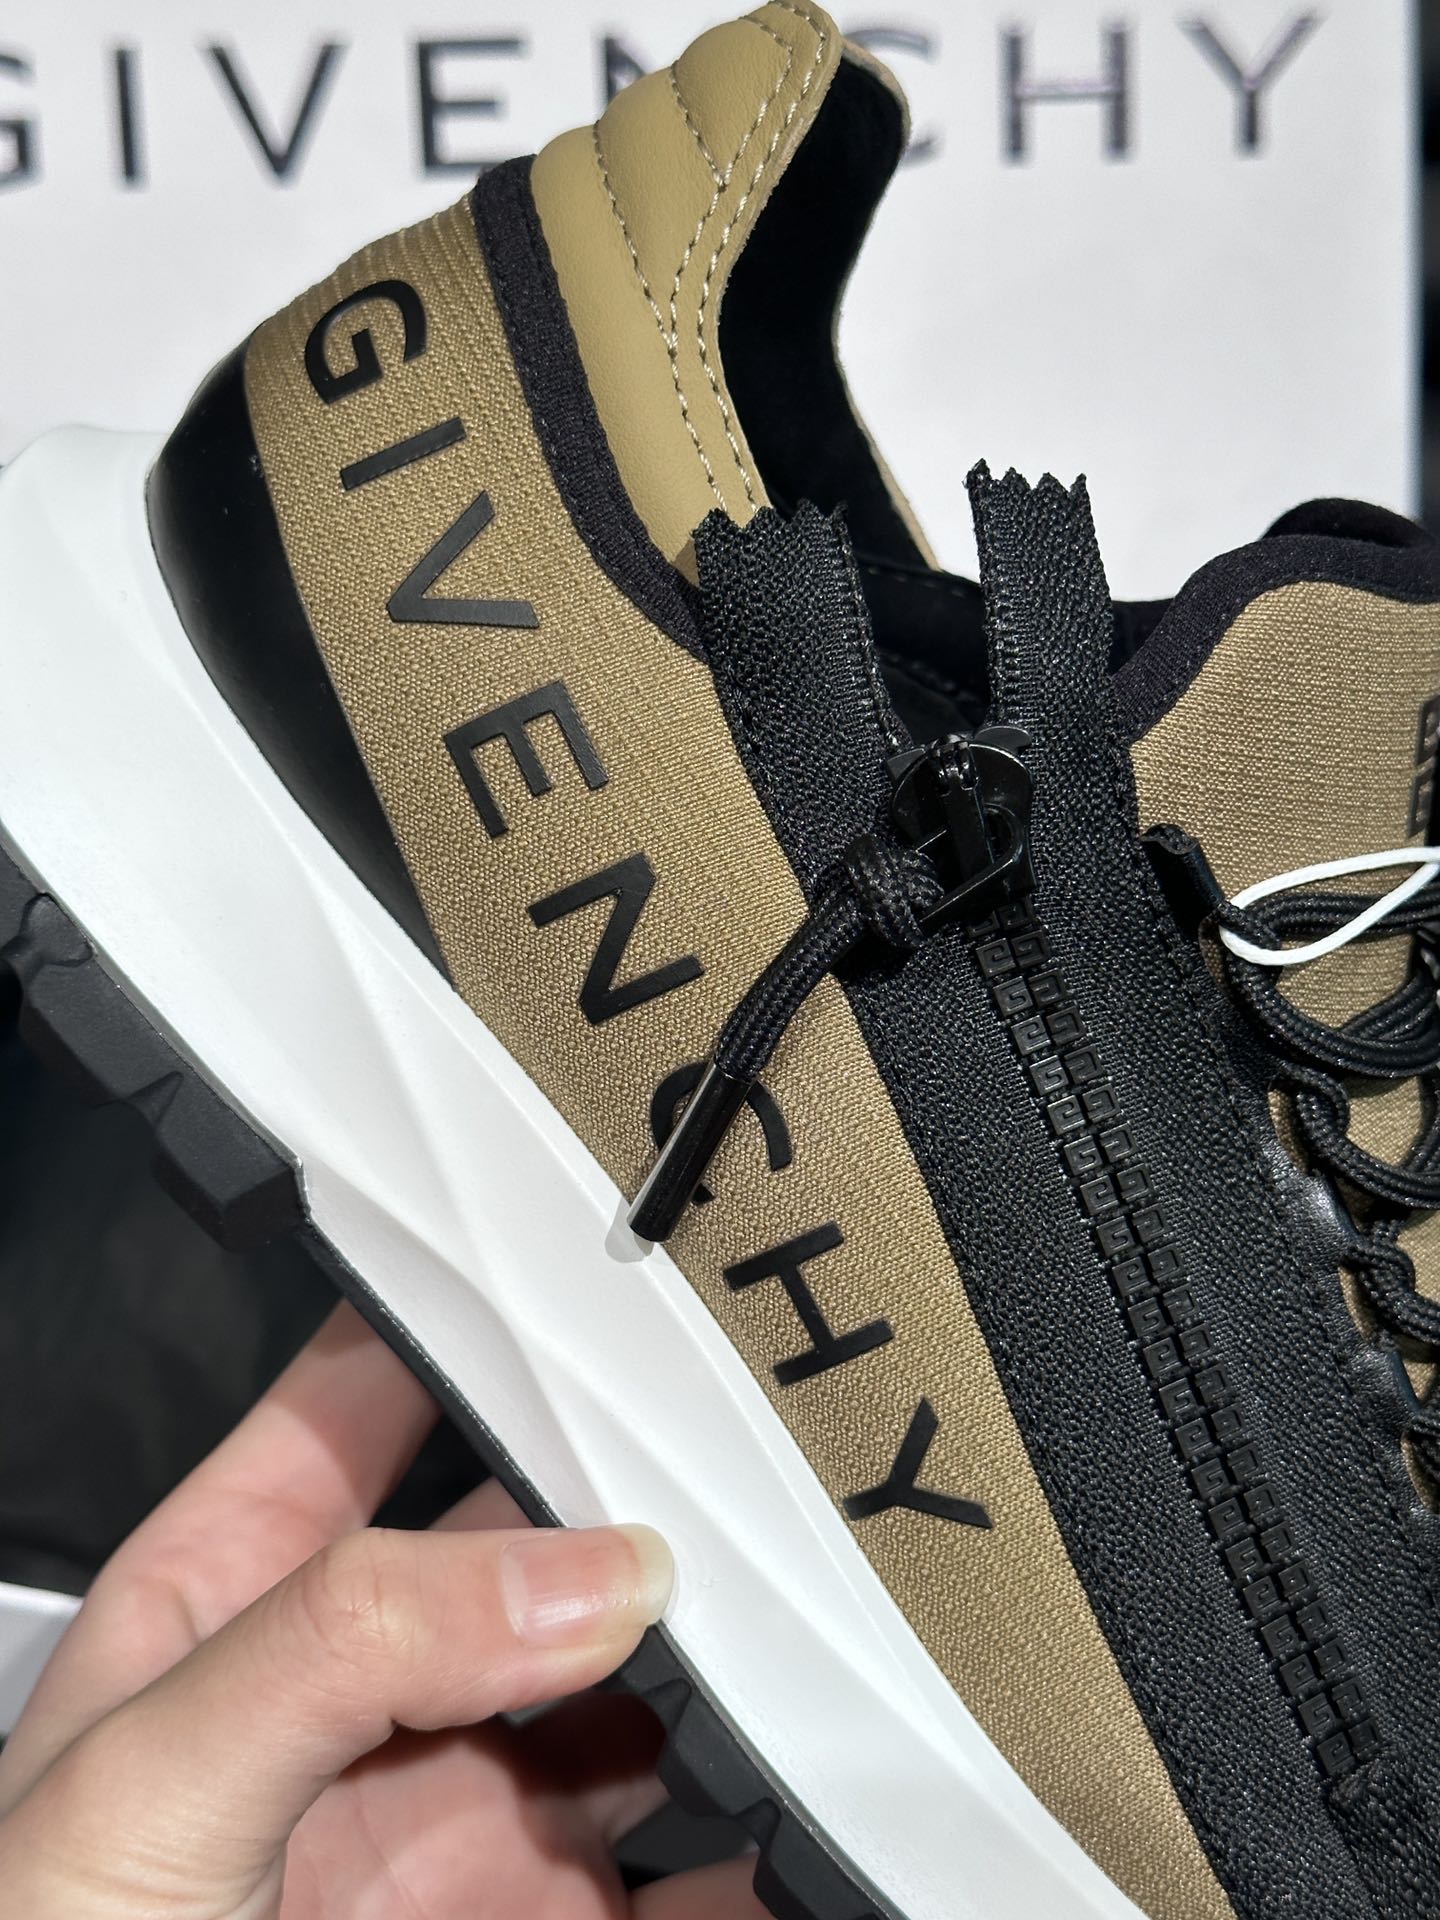 Givenchy Spectre runner sneakers in leather with zip-brown